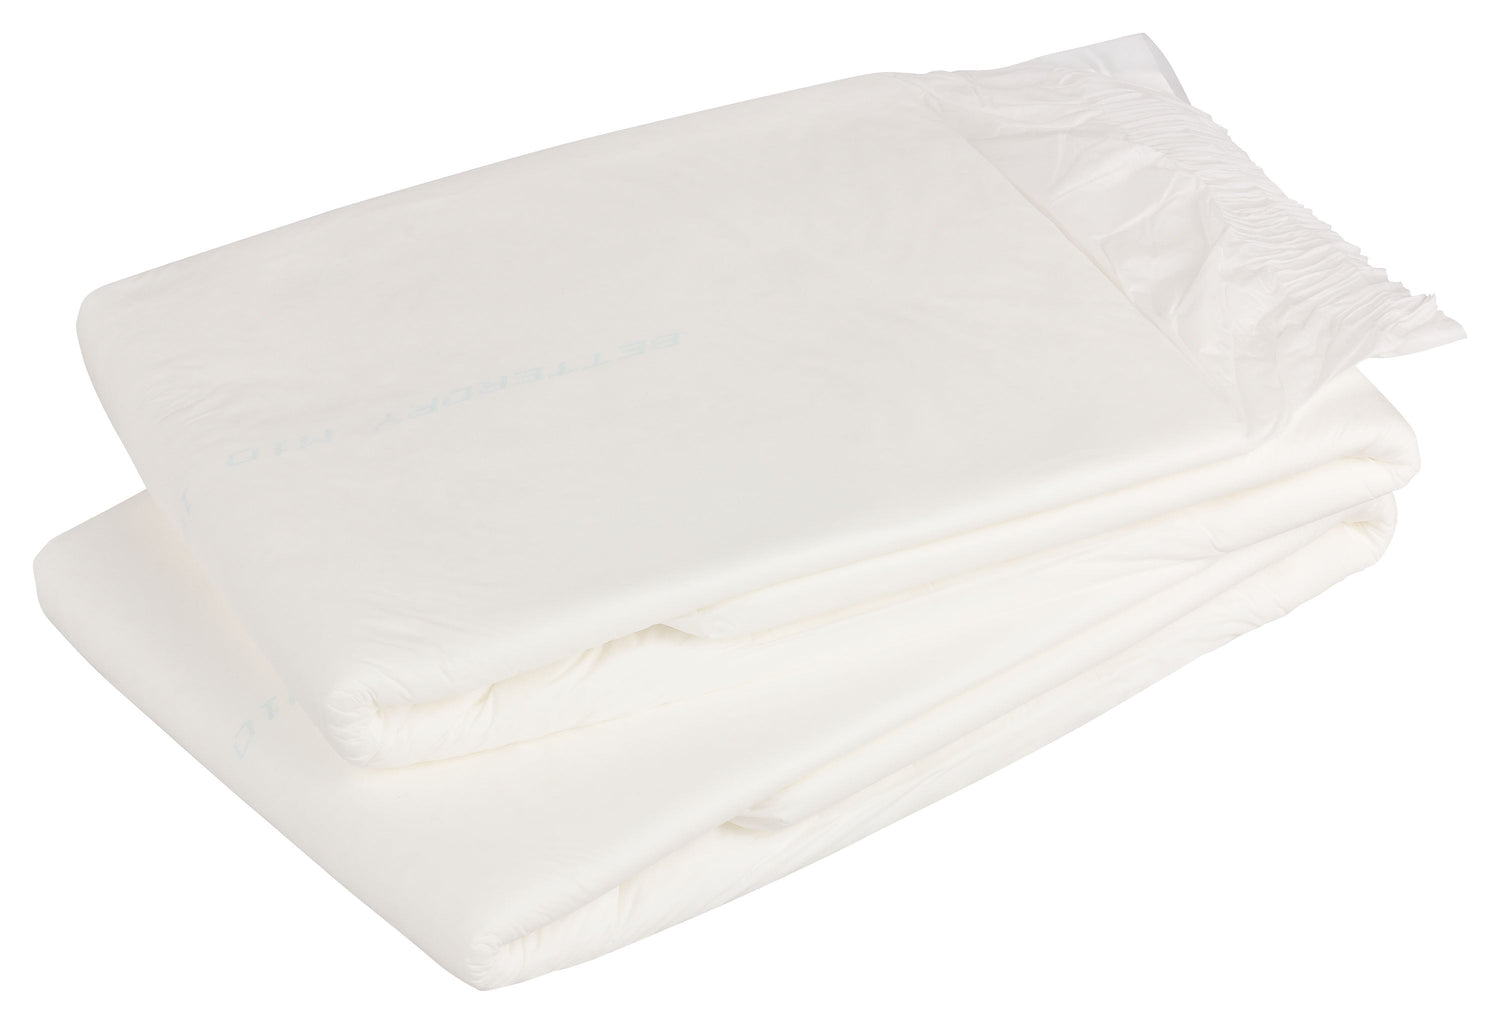 BetterDry 10 folded adult diapers - for maximum protection for heavy incontinence.